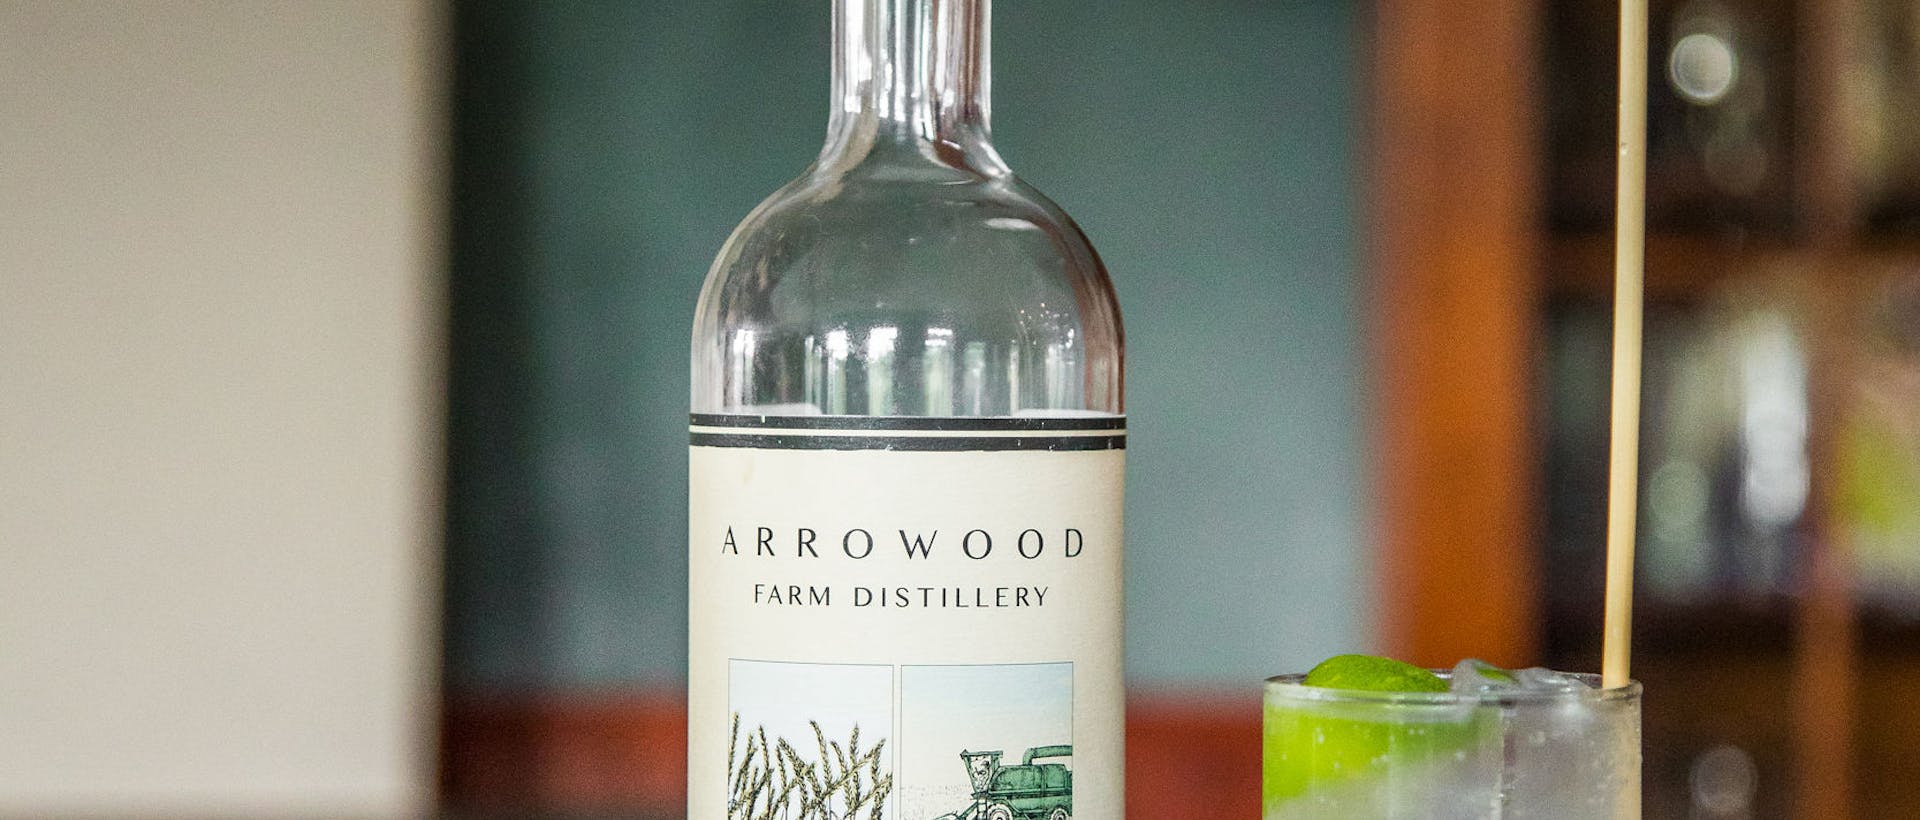 Bottle of Arrowood farms Vodka on top of the bar